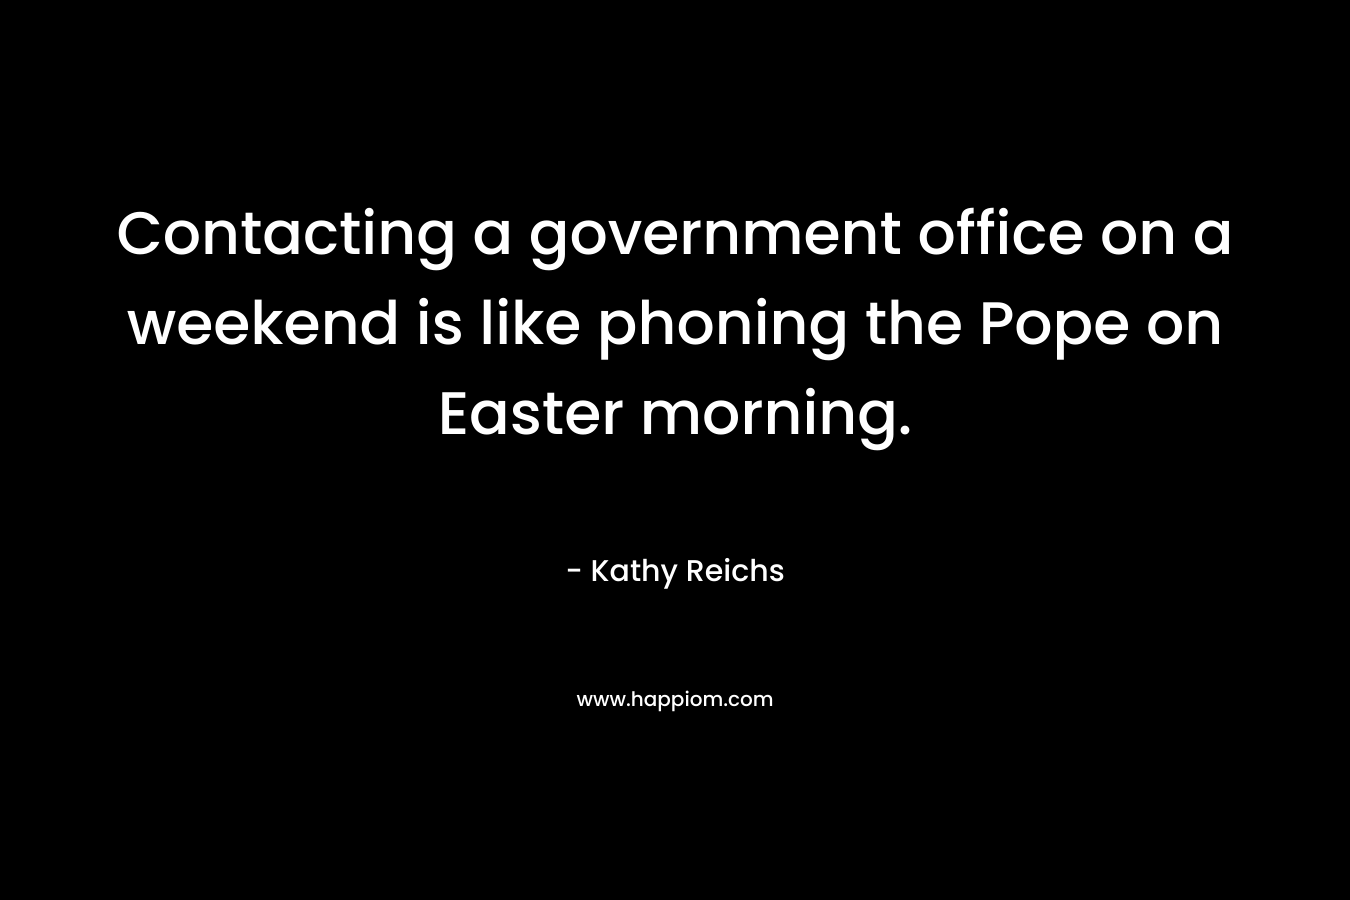 Contacting a government office on a weekend is like phoning the Pope on Easter morning.